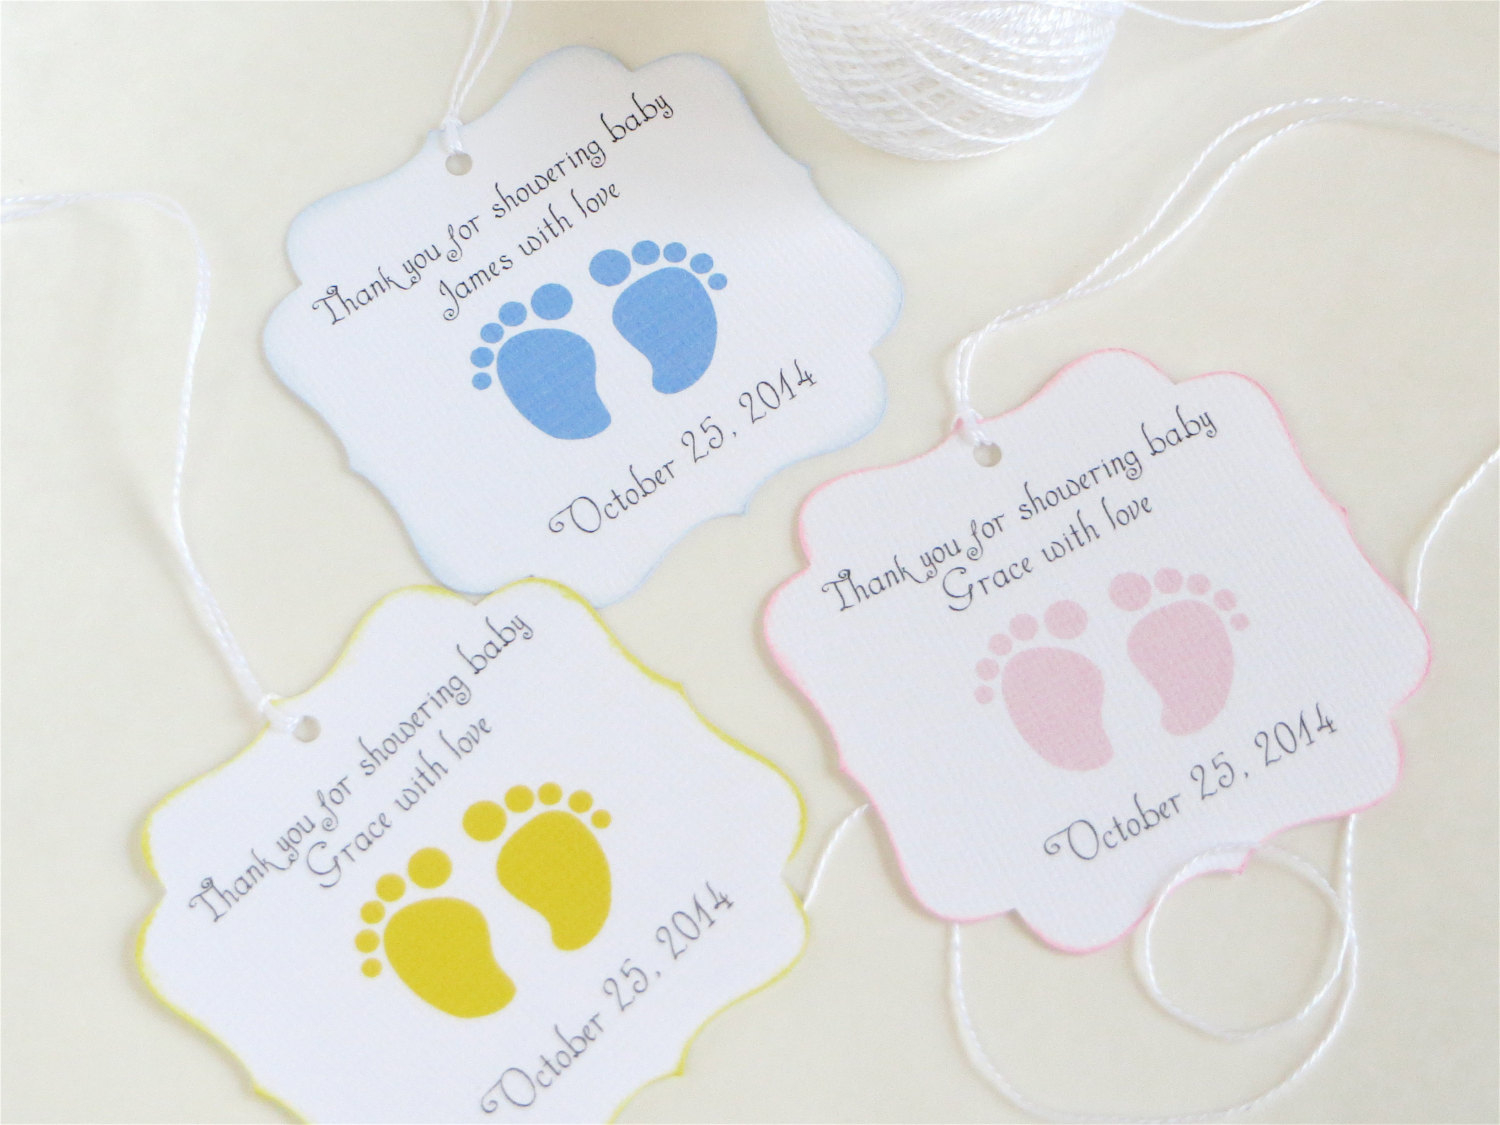 Full Size of Baby Shower:36+ Retro Baby Shower Thank You Wording Image Concepts Baby Shower Thank You Wording Thank You Baby Shower Gifts Sample Wording For Hostess Gift Ideas Thank You Baby Shower Gifts Images High Definition Note To Coworkers For Gift Card Cheap Ideas